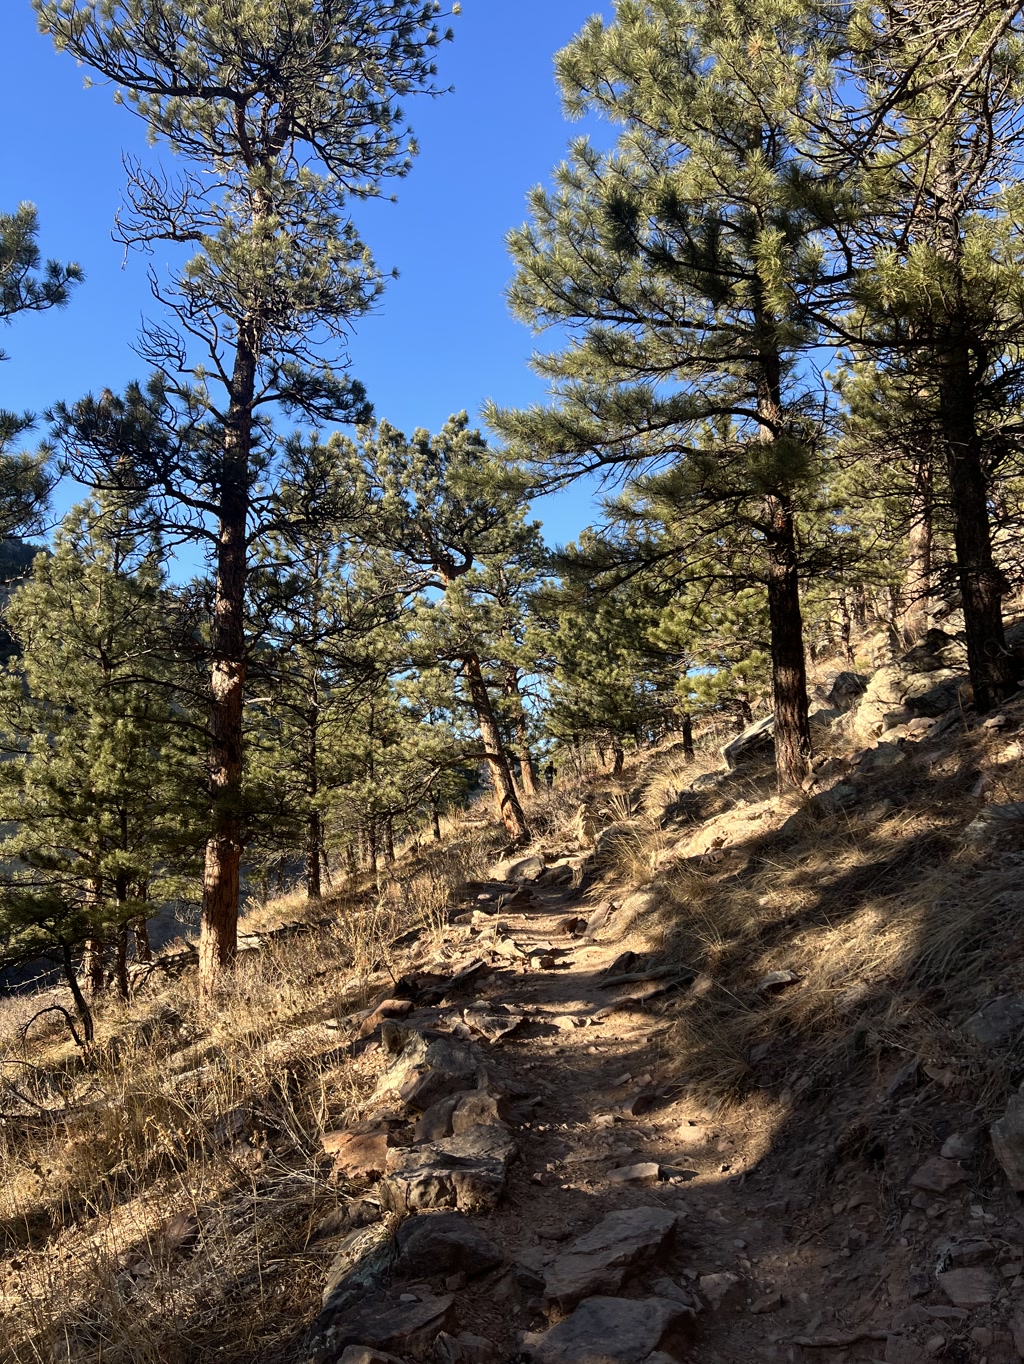 A hiking trail meanders up a forest-covered slope with various sized stones and rocks defining the path. Tall pine trees with dark green needles stand on each side of the rough, uneven trail. Dry grasses and small shrubs are scattered along the edges of the path, while the trees cast shadows in the bright sunlight. Above, a clear blue sky without a single cloud can be seen through the canopy of the trees.